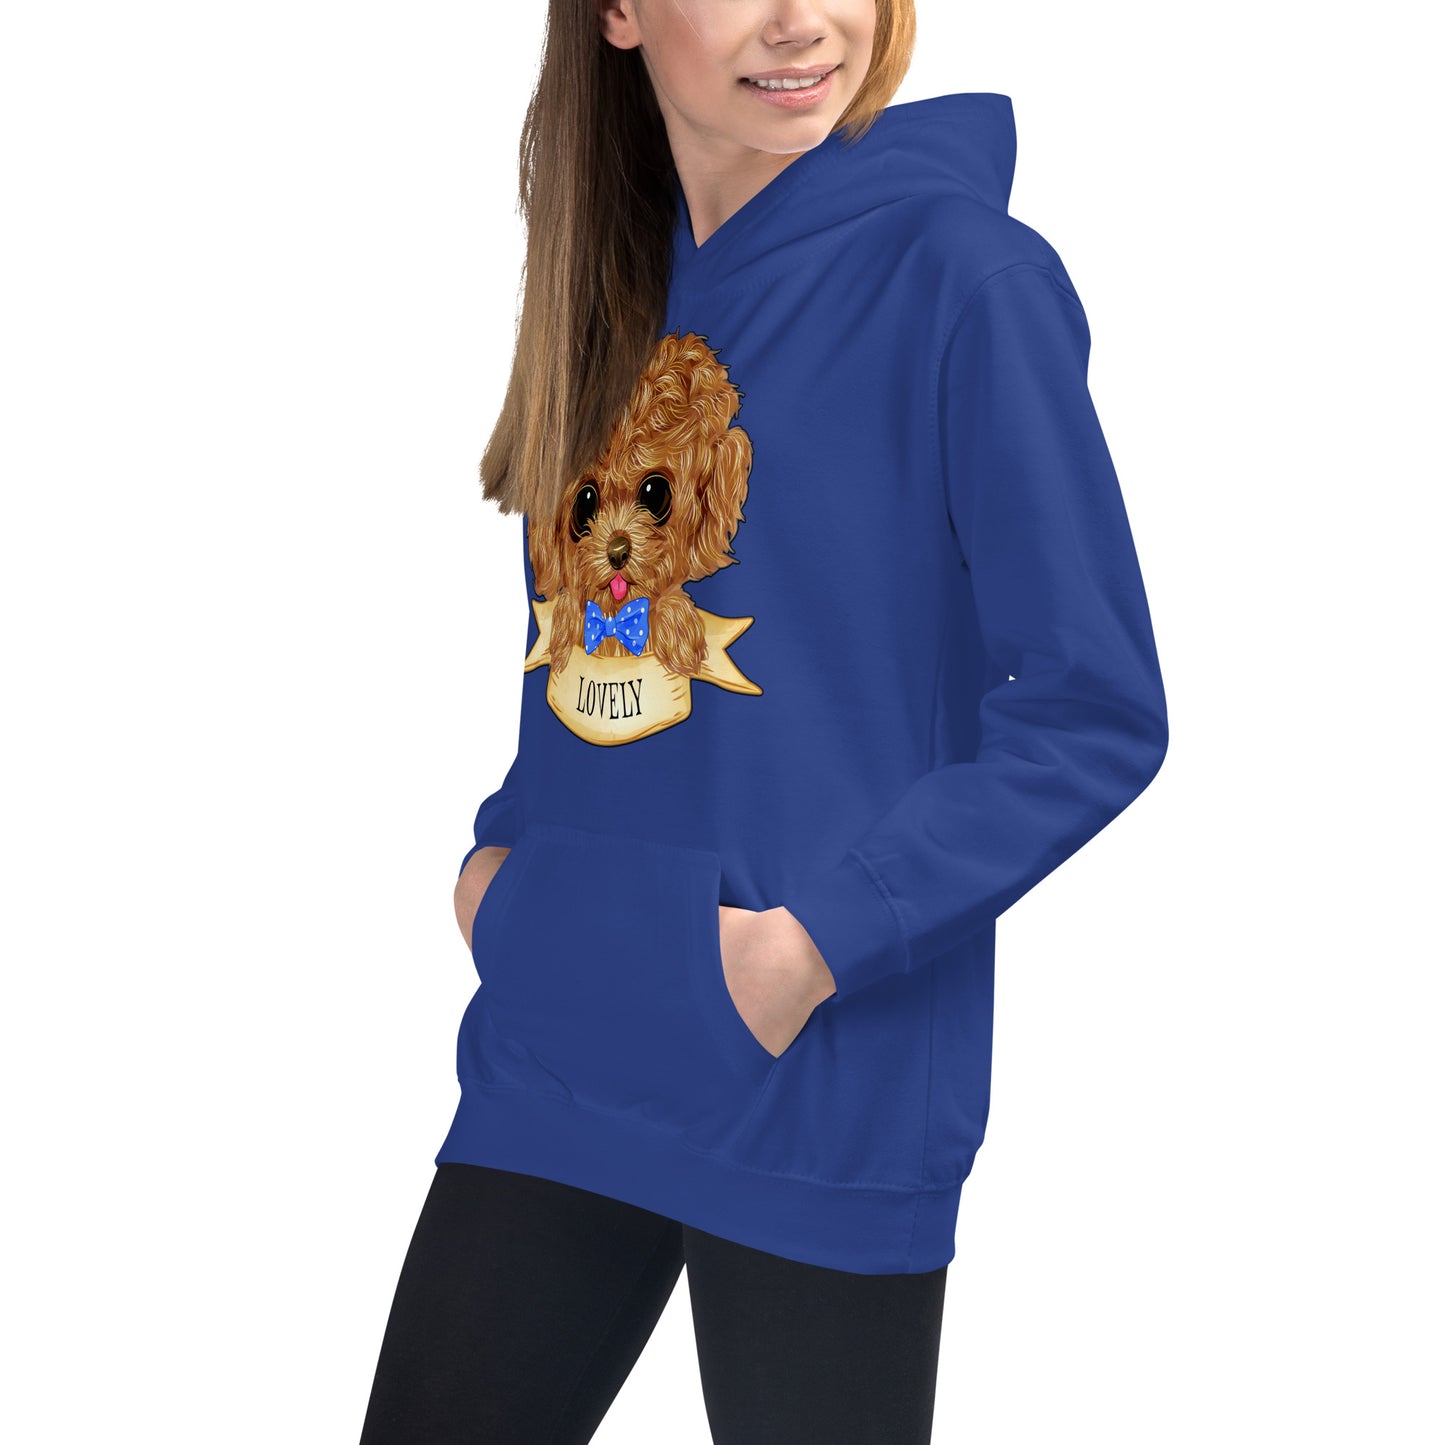 Lovely Dog Puppy Hoodie, No. 0472